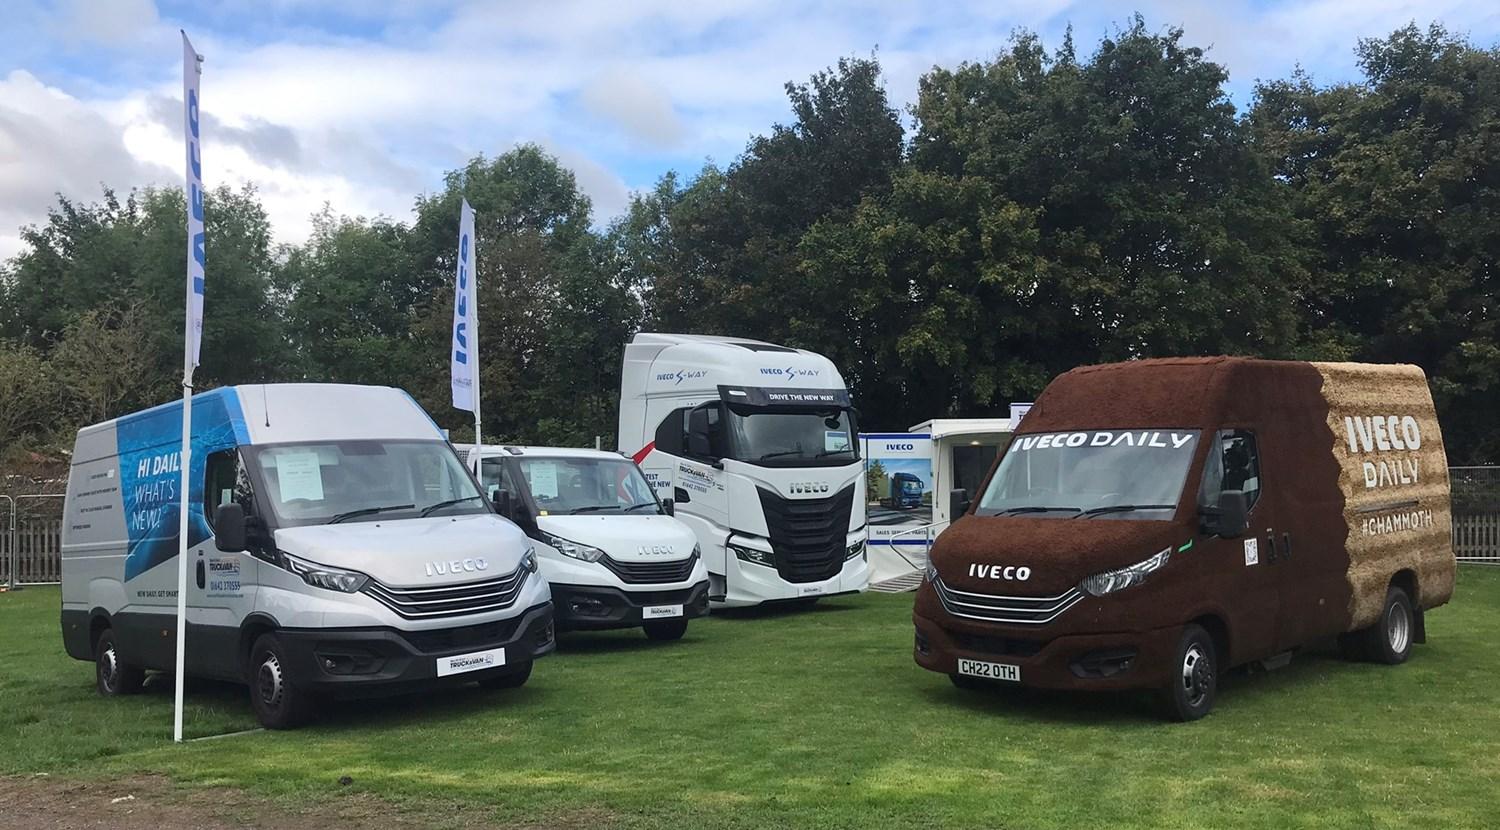 IVECO Daily Chammot vehicle alongside other IVECO vehicles